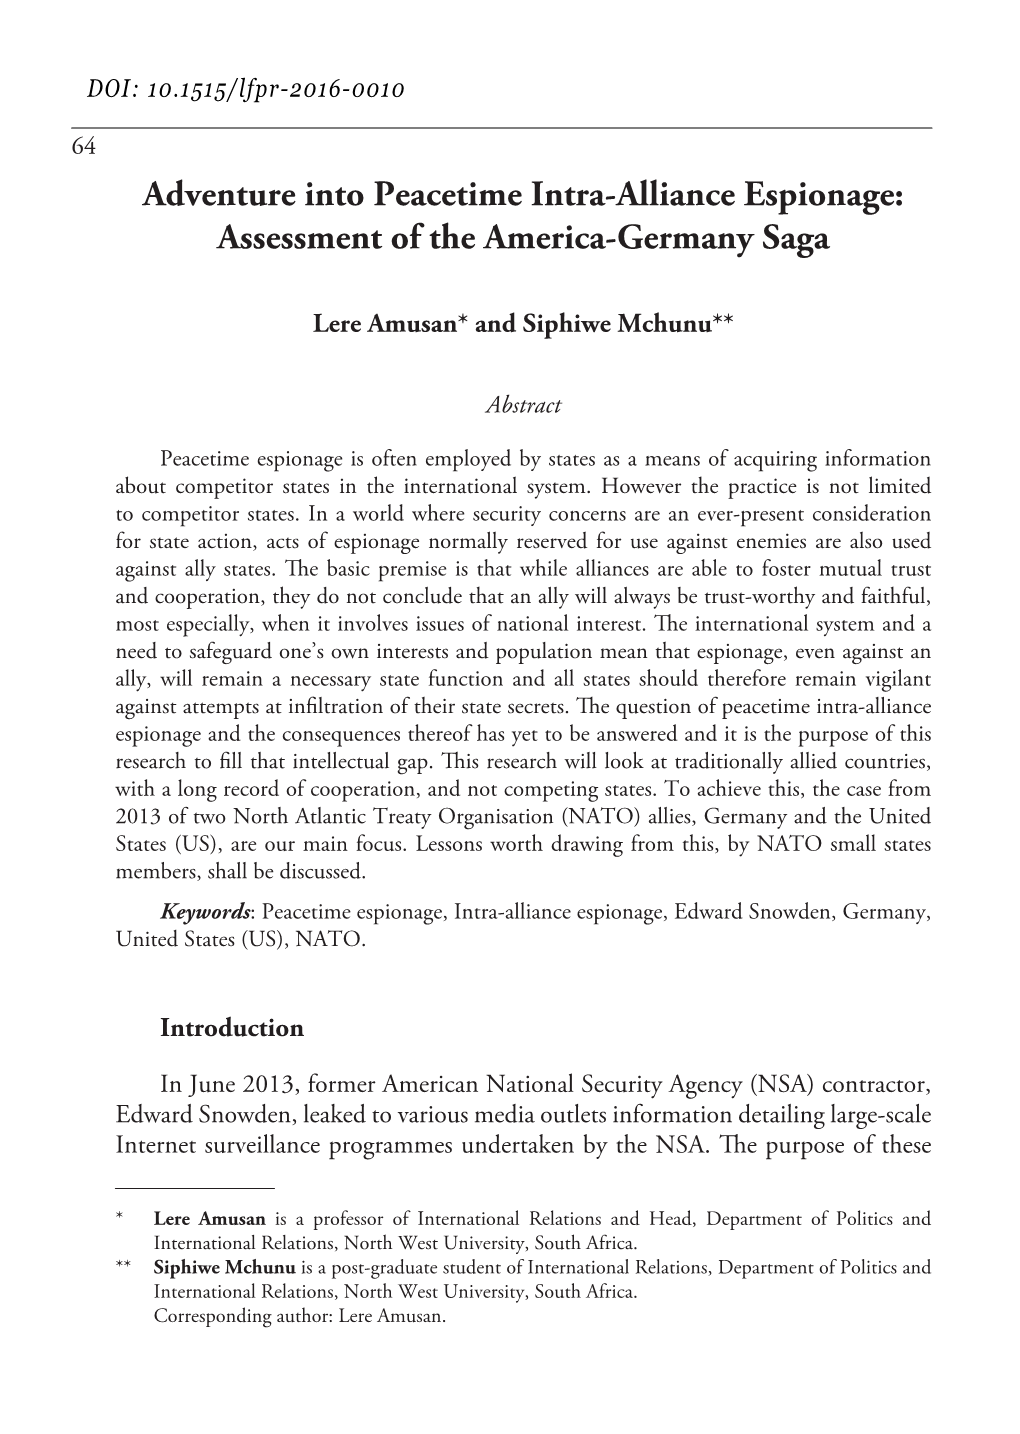 Adventure Into Peacetime Intra-Alliance Espionage: Assessment of the America-Germany Saga